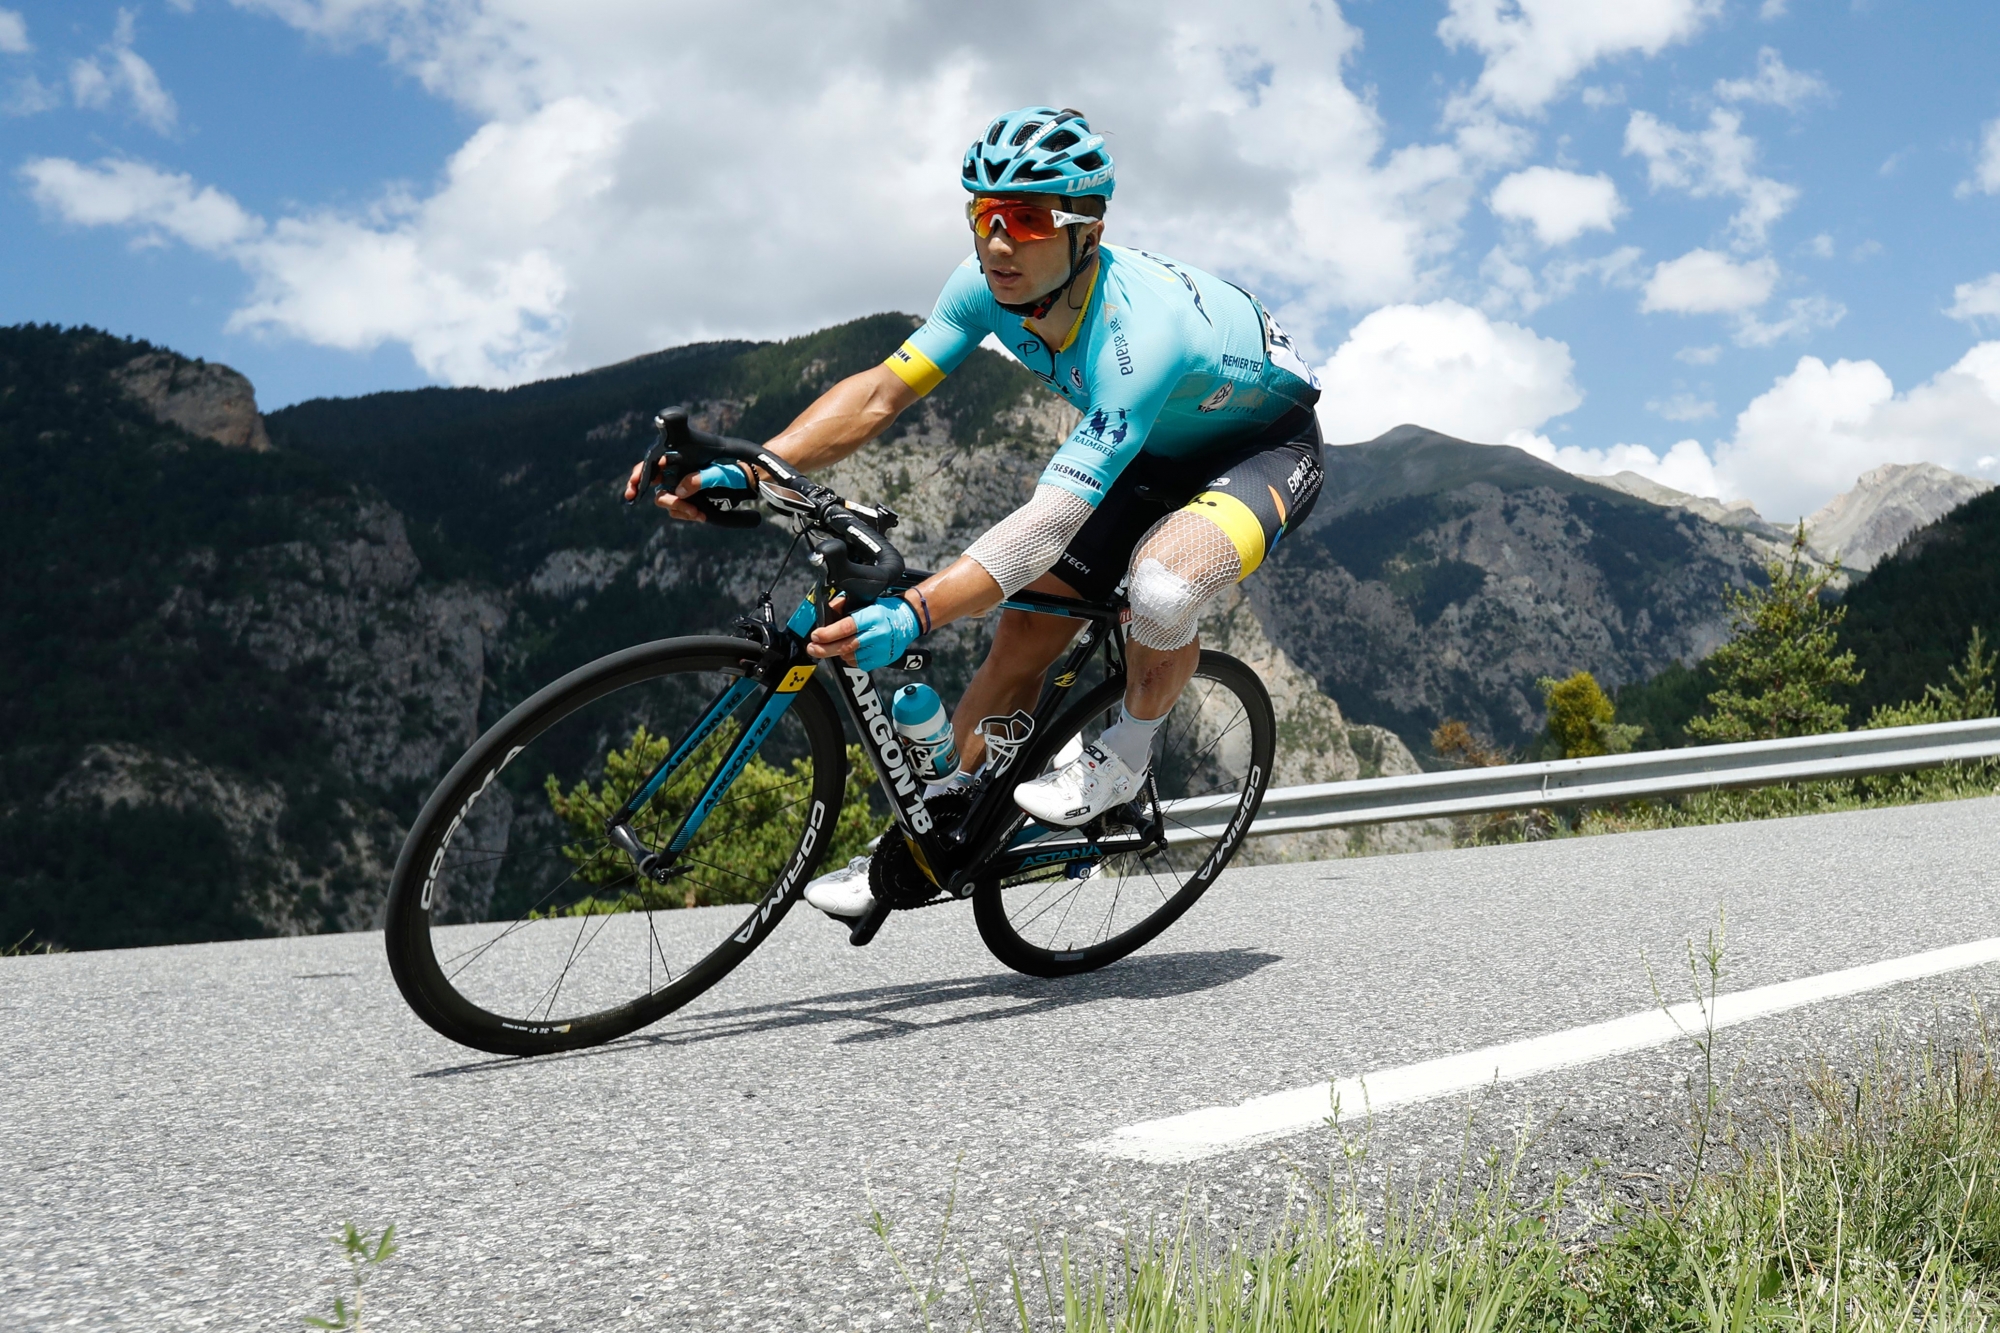 epa06099539 Astana Pro Team rider Alexey Lutsenko of Kazakhstan in action during the 18th stage of the 104th edition of the Tour de France cycling race over 179,5km between Briancon and Izoard, France, 20 July 2017.  EPA/GUILLAUME HORCAJUELOs RAD TOUR DE FRANCE 2017